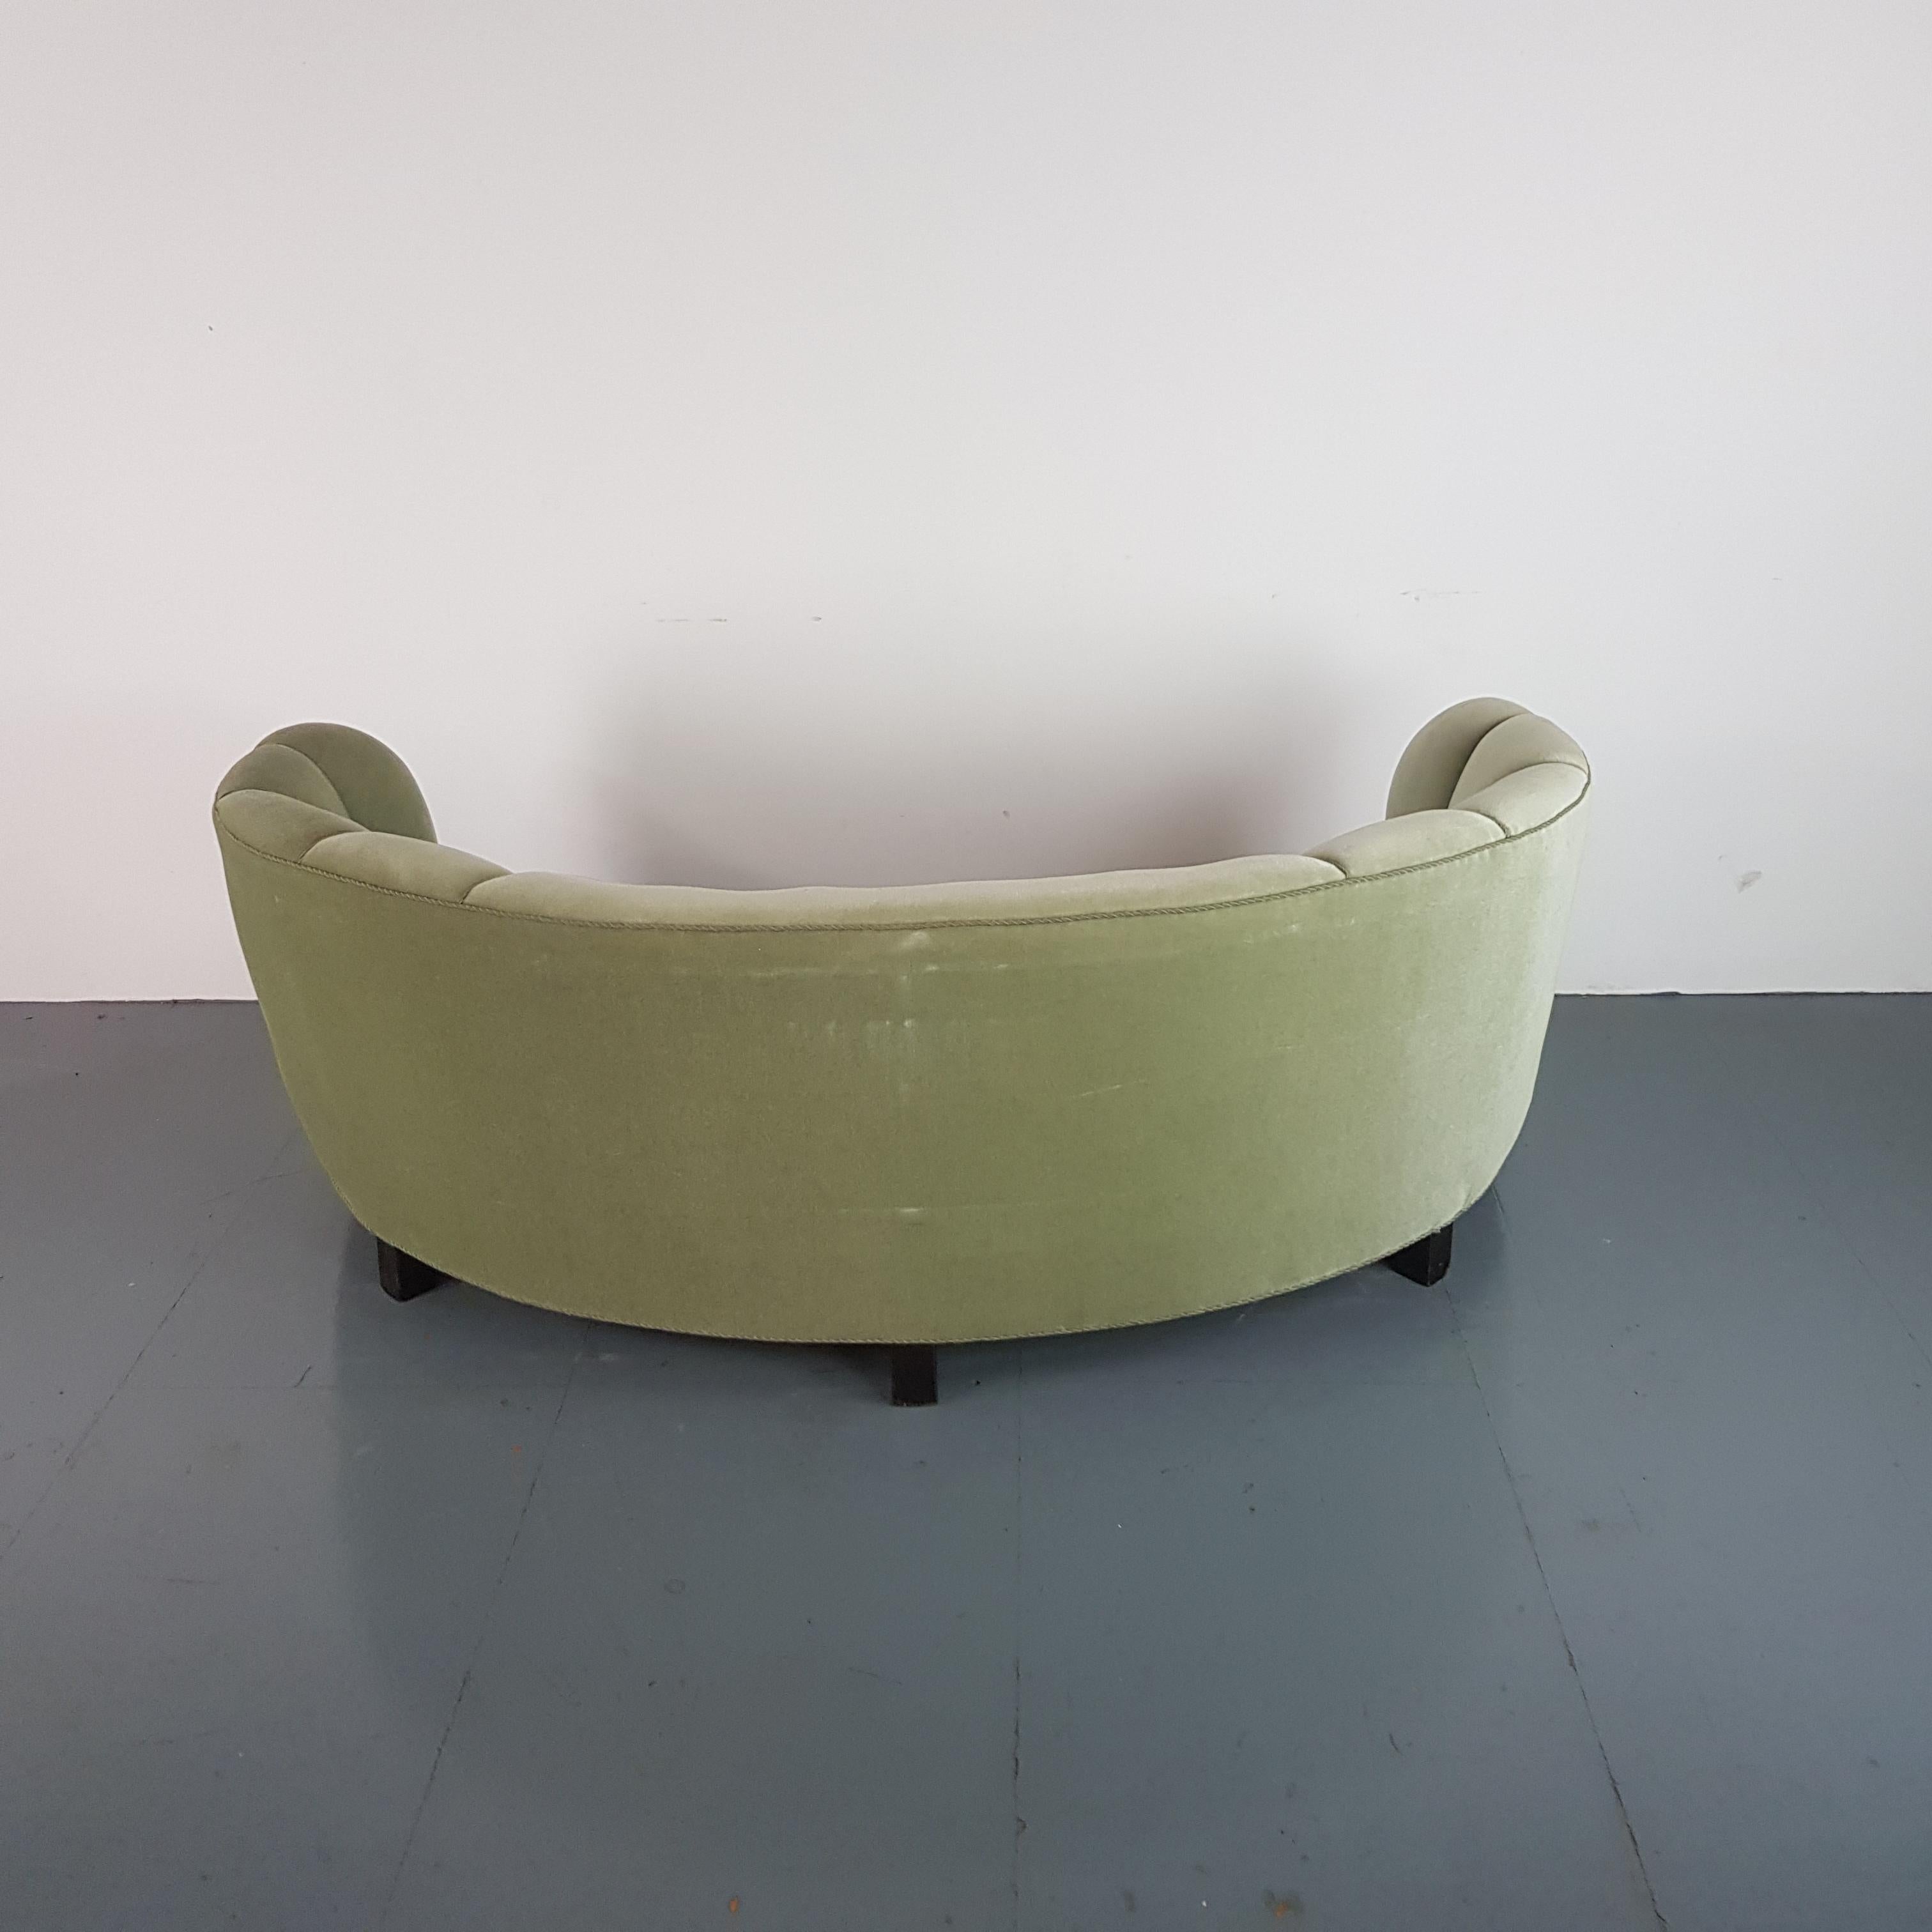 Gorgeous Danish curved Banana sofa upholstered in its original green velvet fabric, with wooden legs.

Approximate dimensions:

Height: 74 cm

Width: 190 cm

Depth: 108cm.

Some wear, as to be expected in a vintage item, but nothing